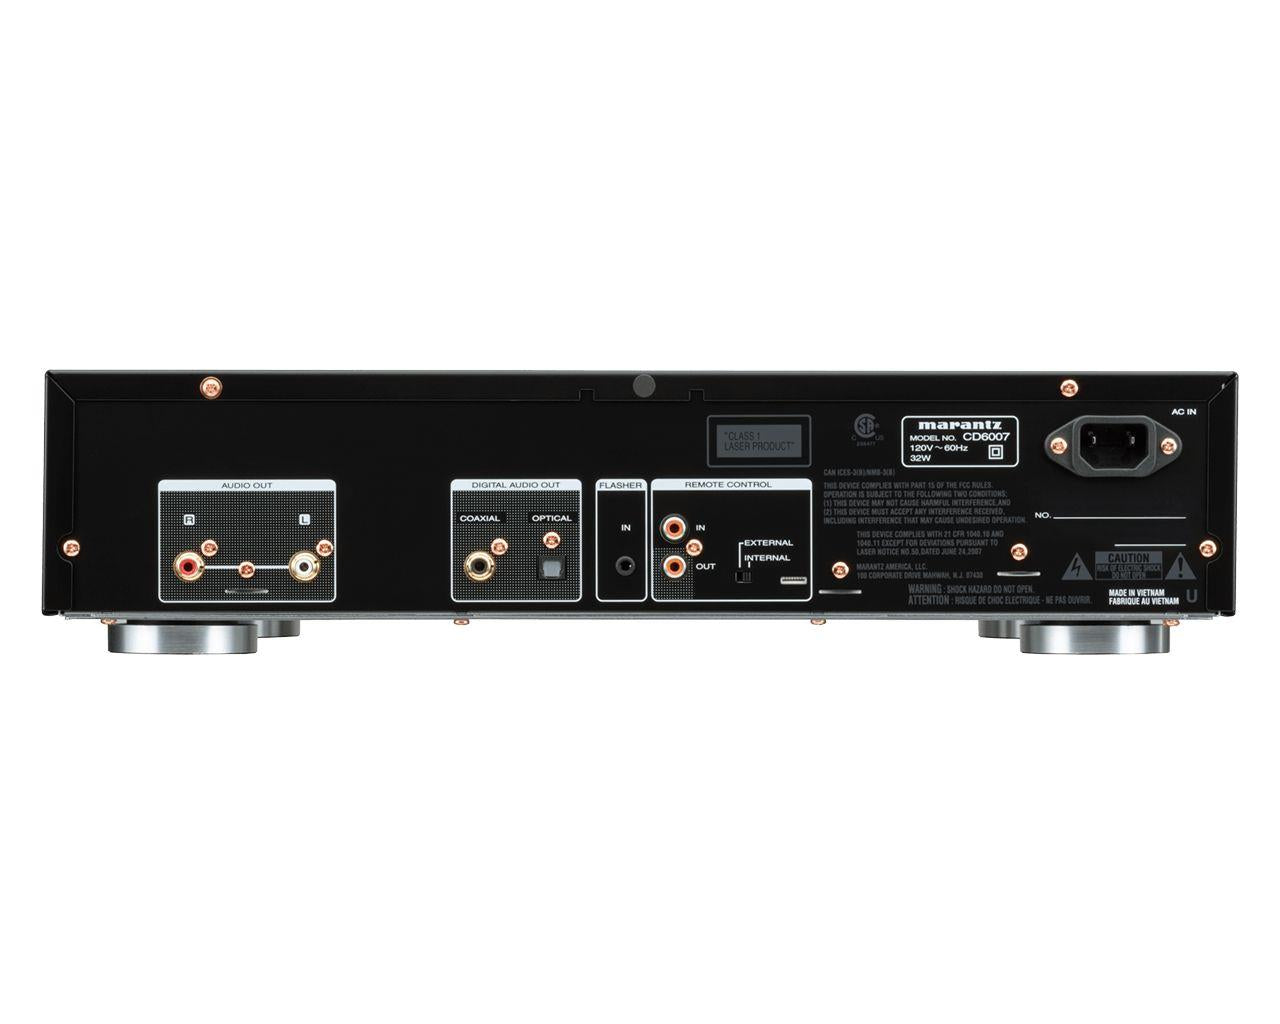 Marantz launches PM6007 integrated amplifier and CD6007 CD player